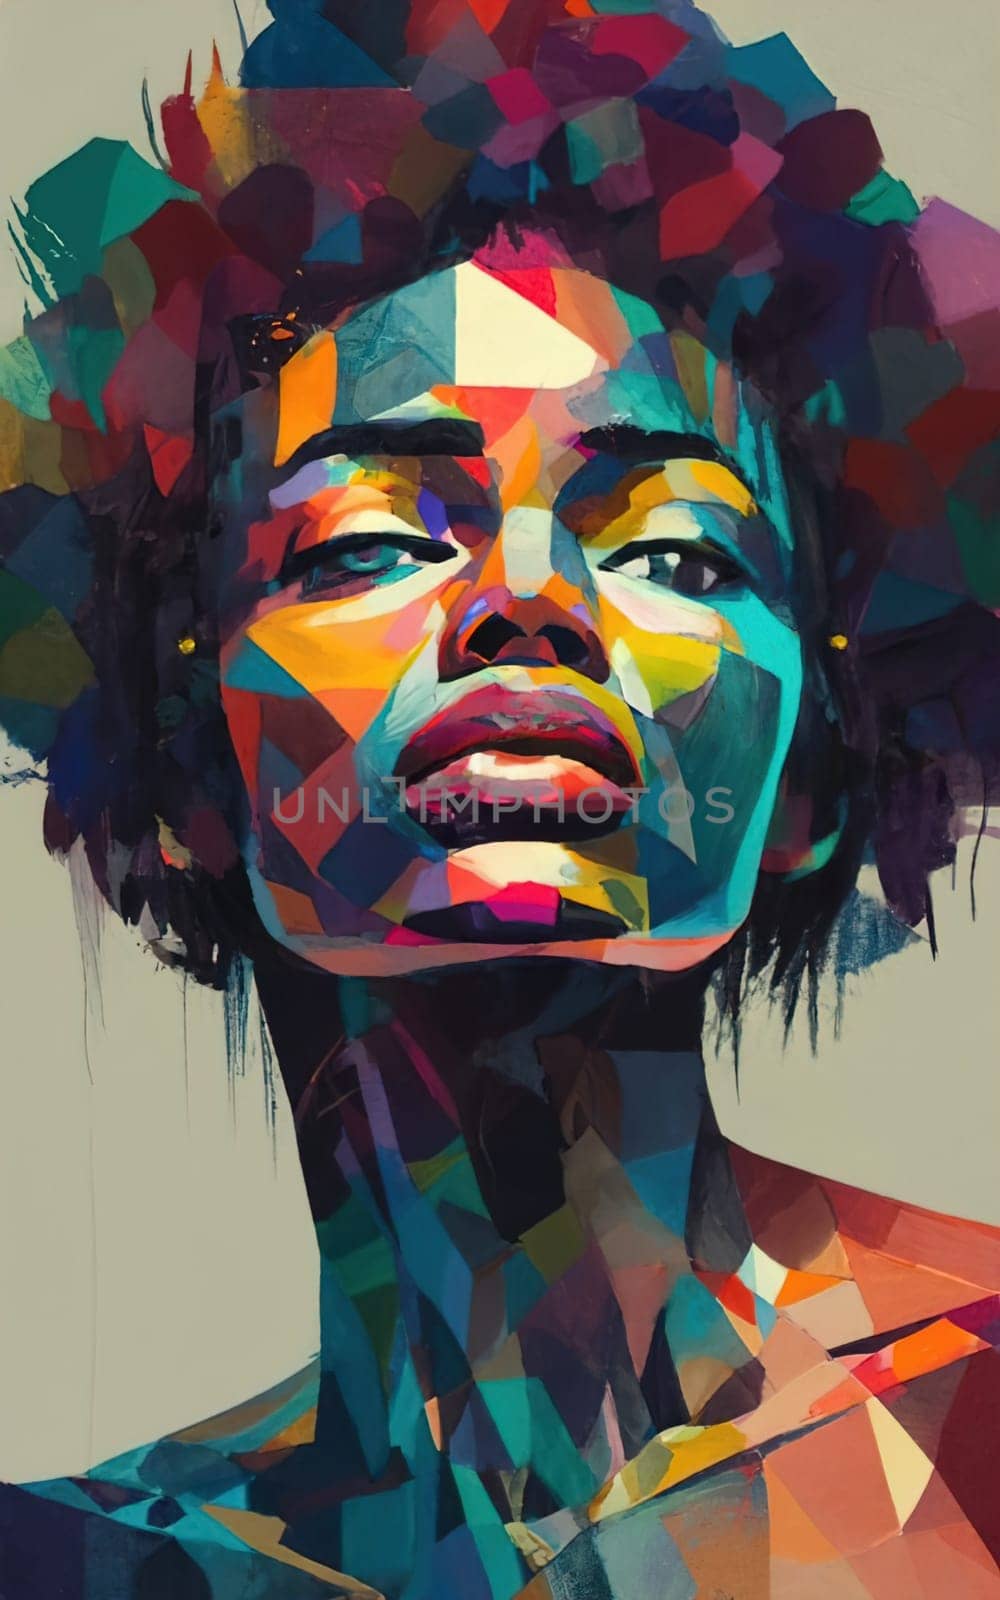 abstract illustration of black woman's face, with colorful pixels, in the style of dimitry roulland, modular, graphic design poster art by igor010